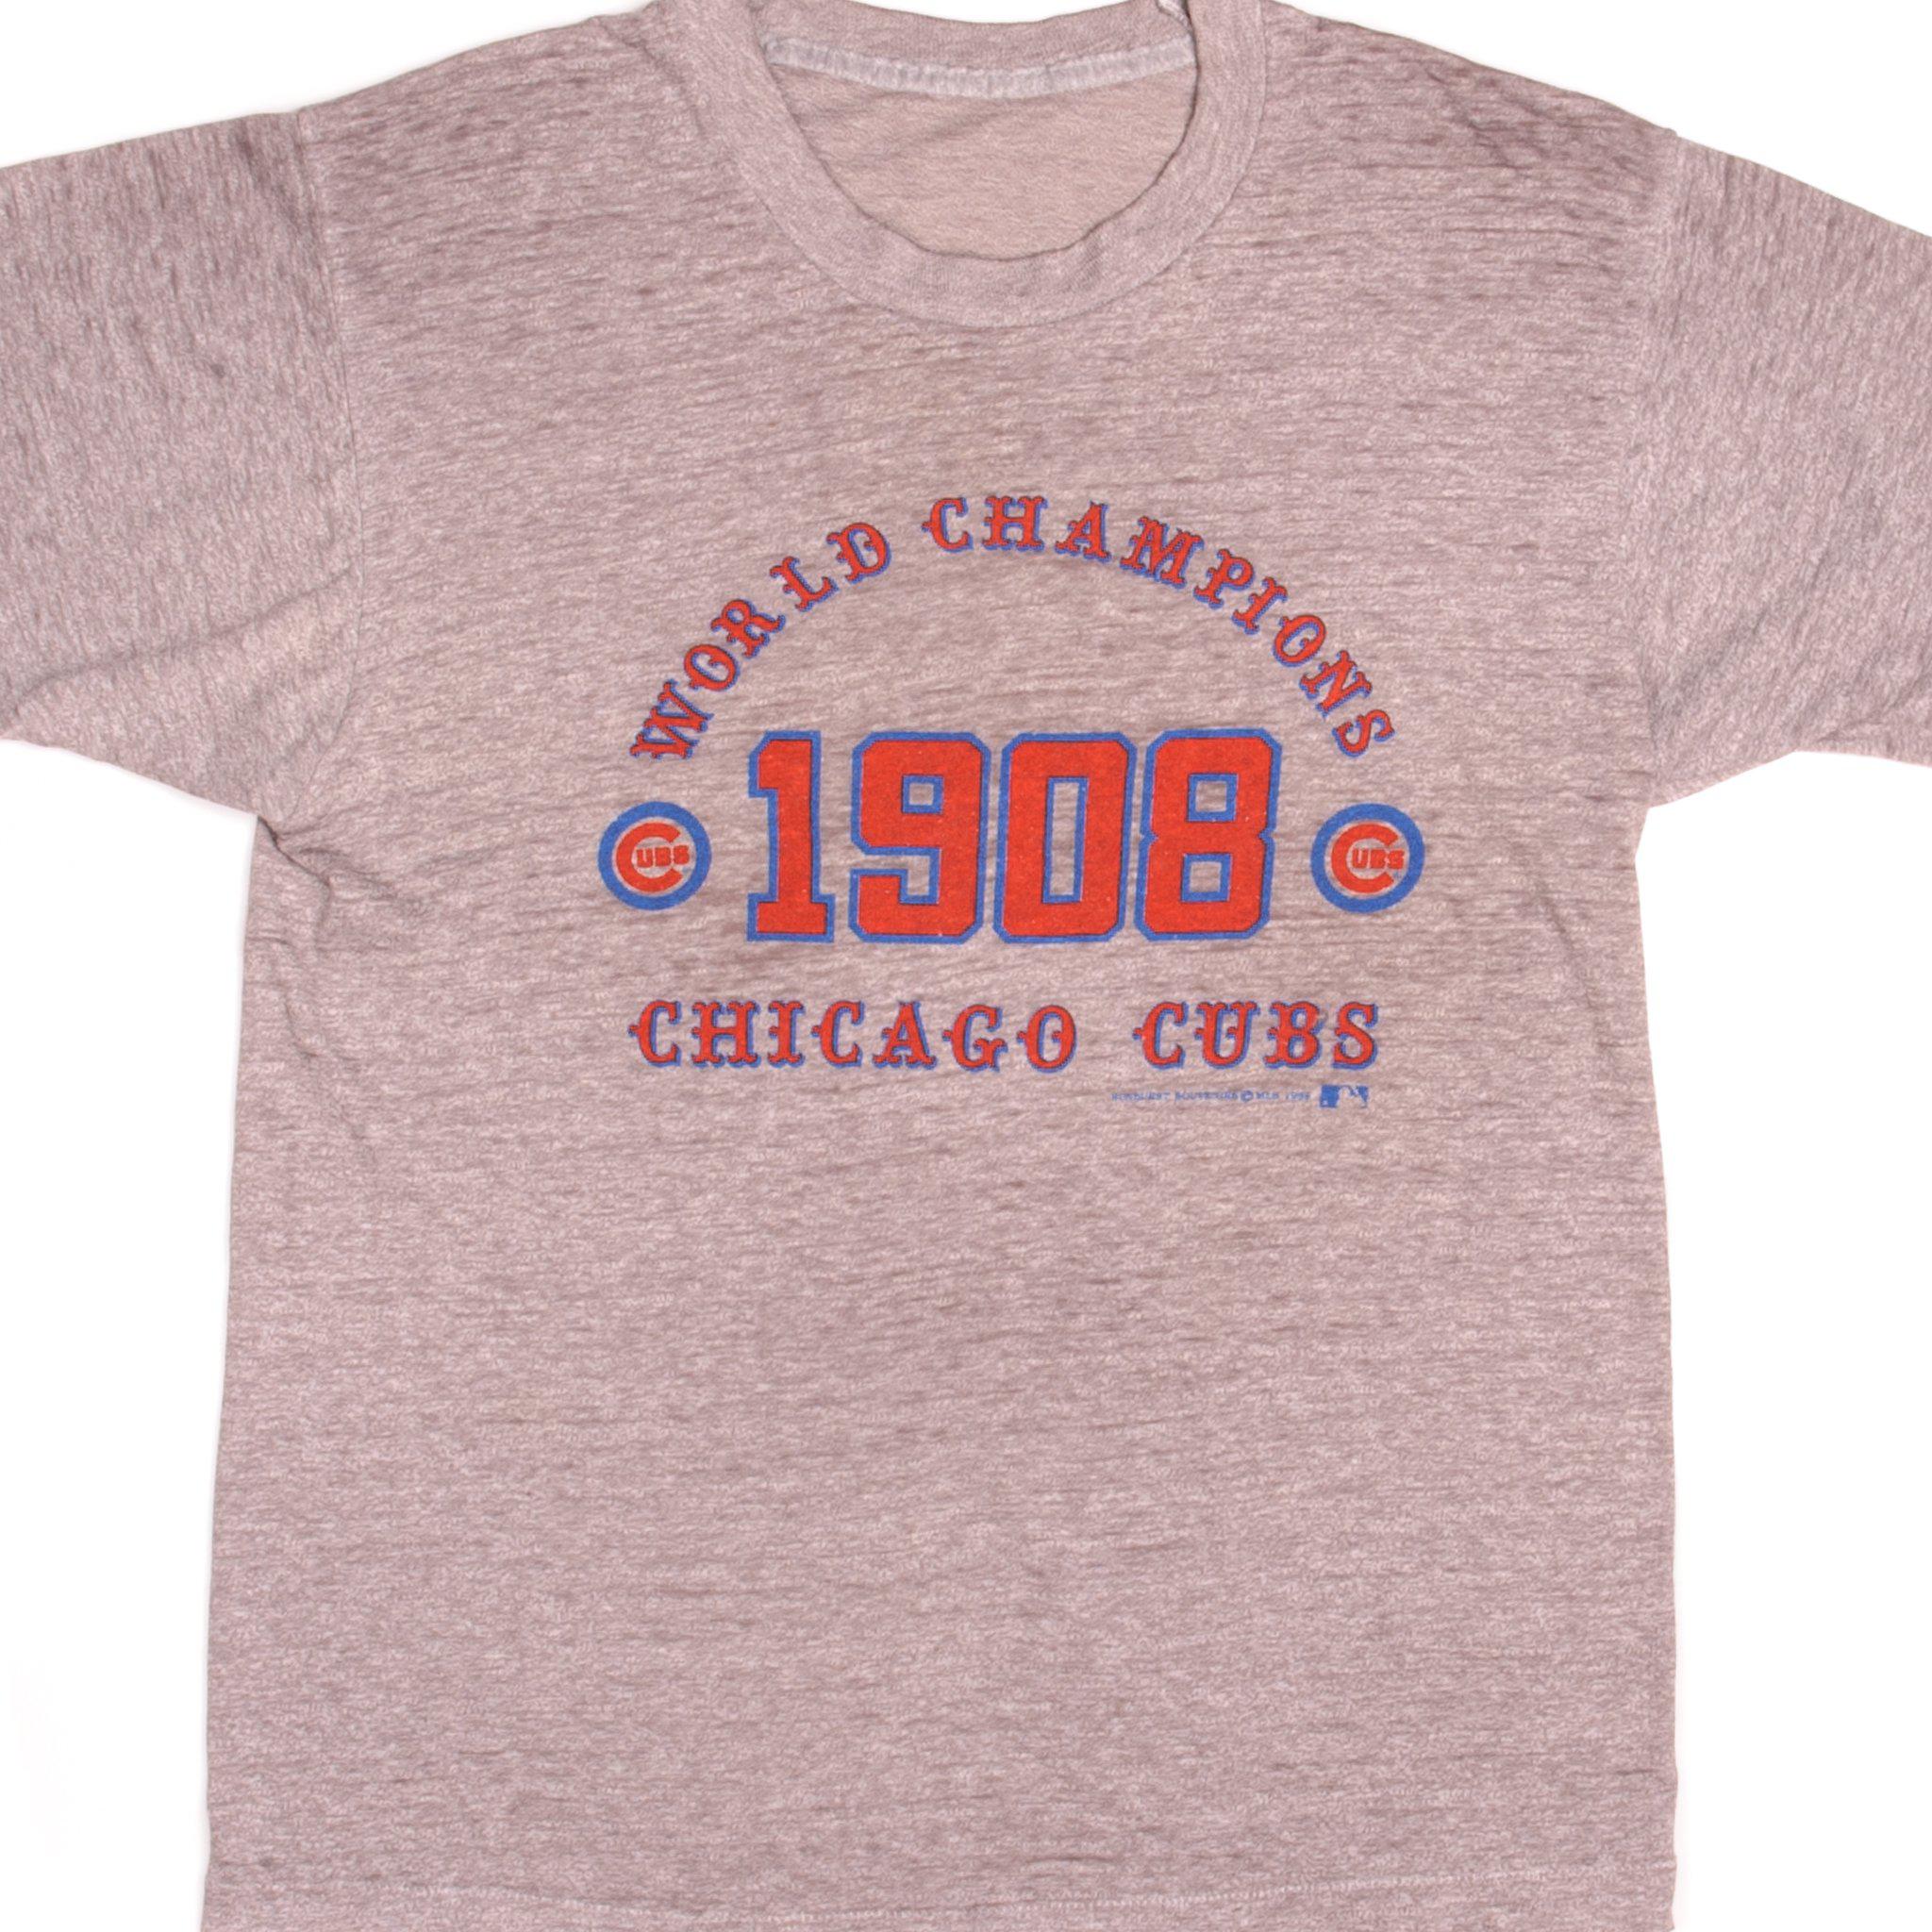 Chicago Cubs (Old School Sleeve Logo)